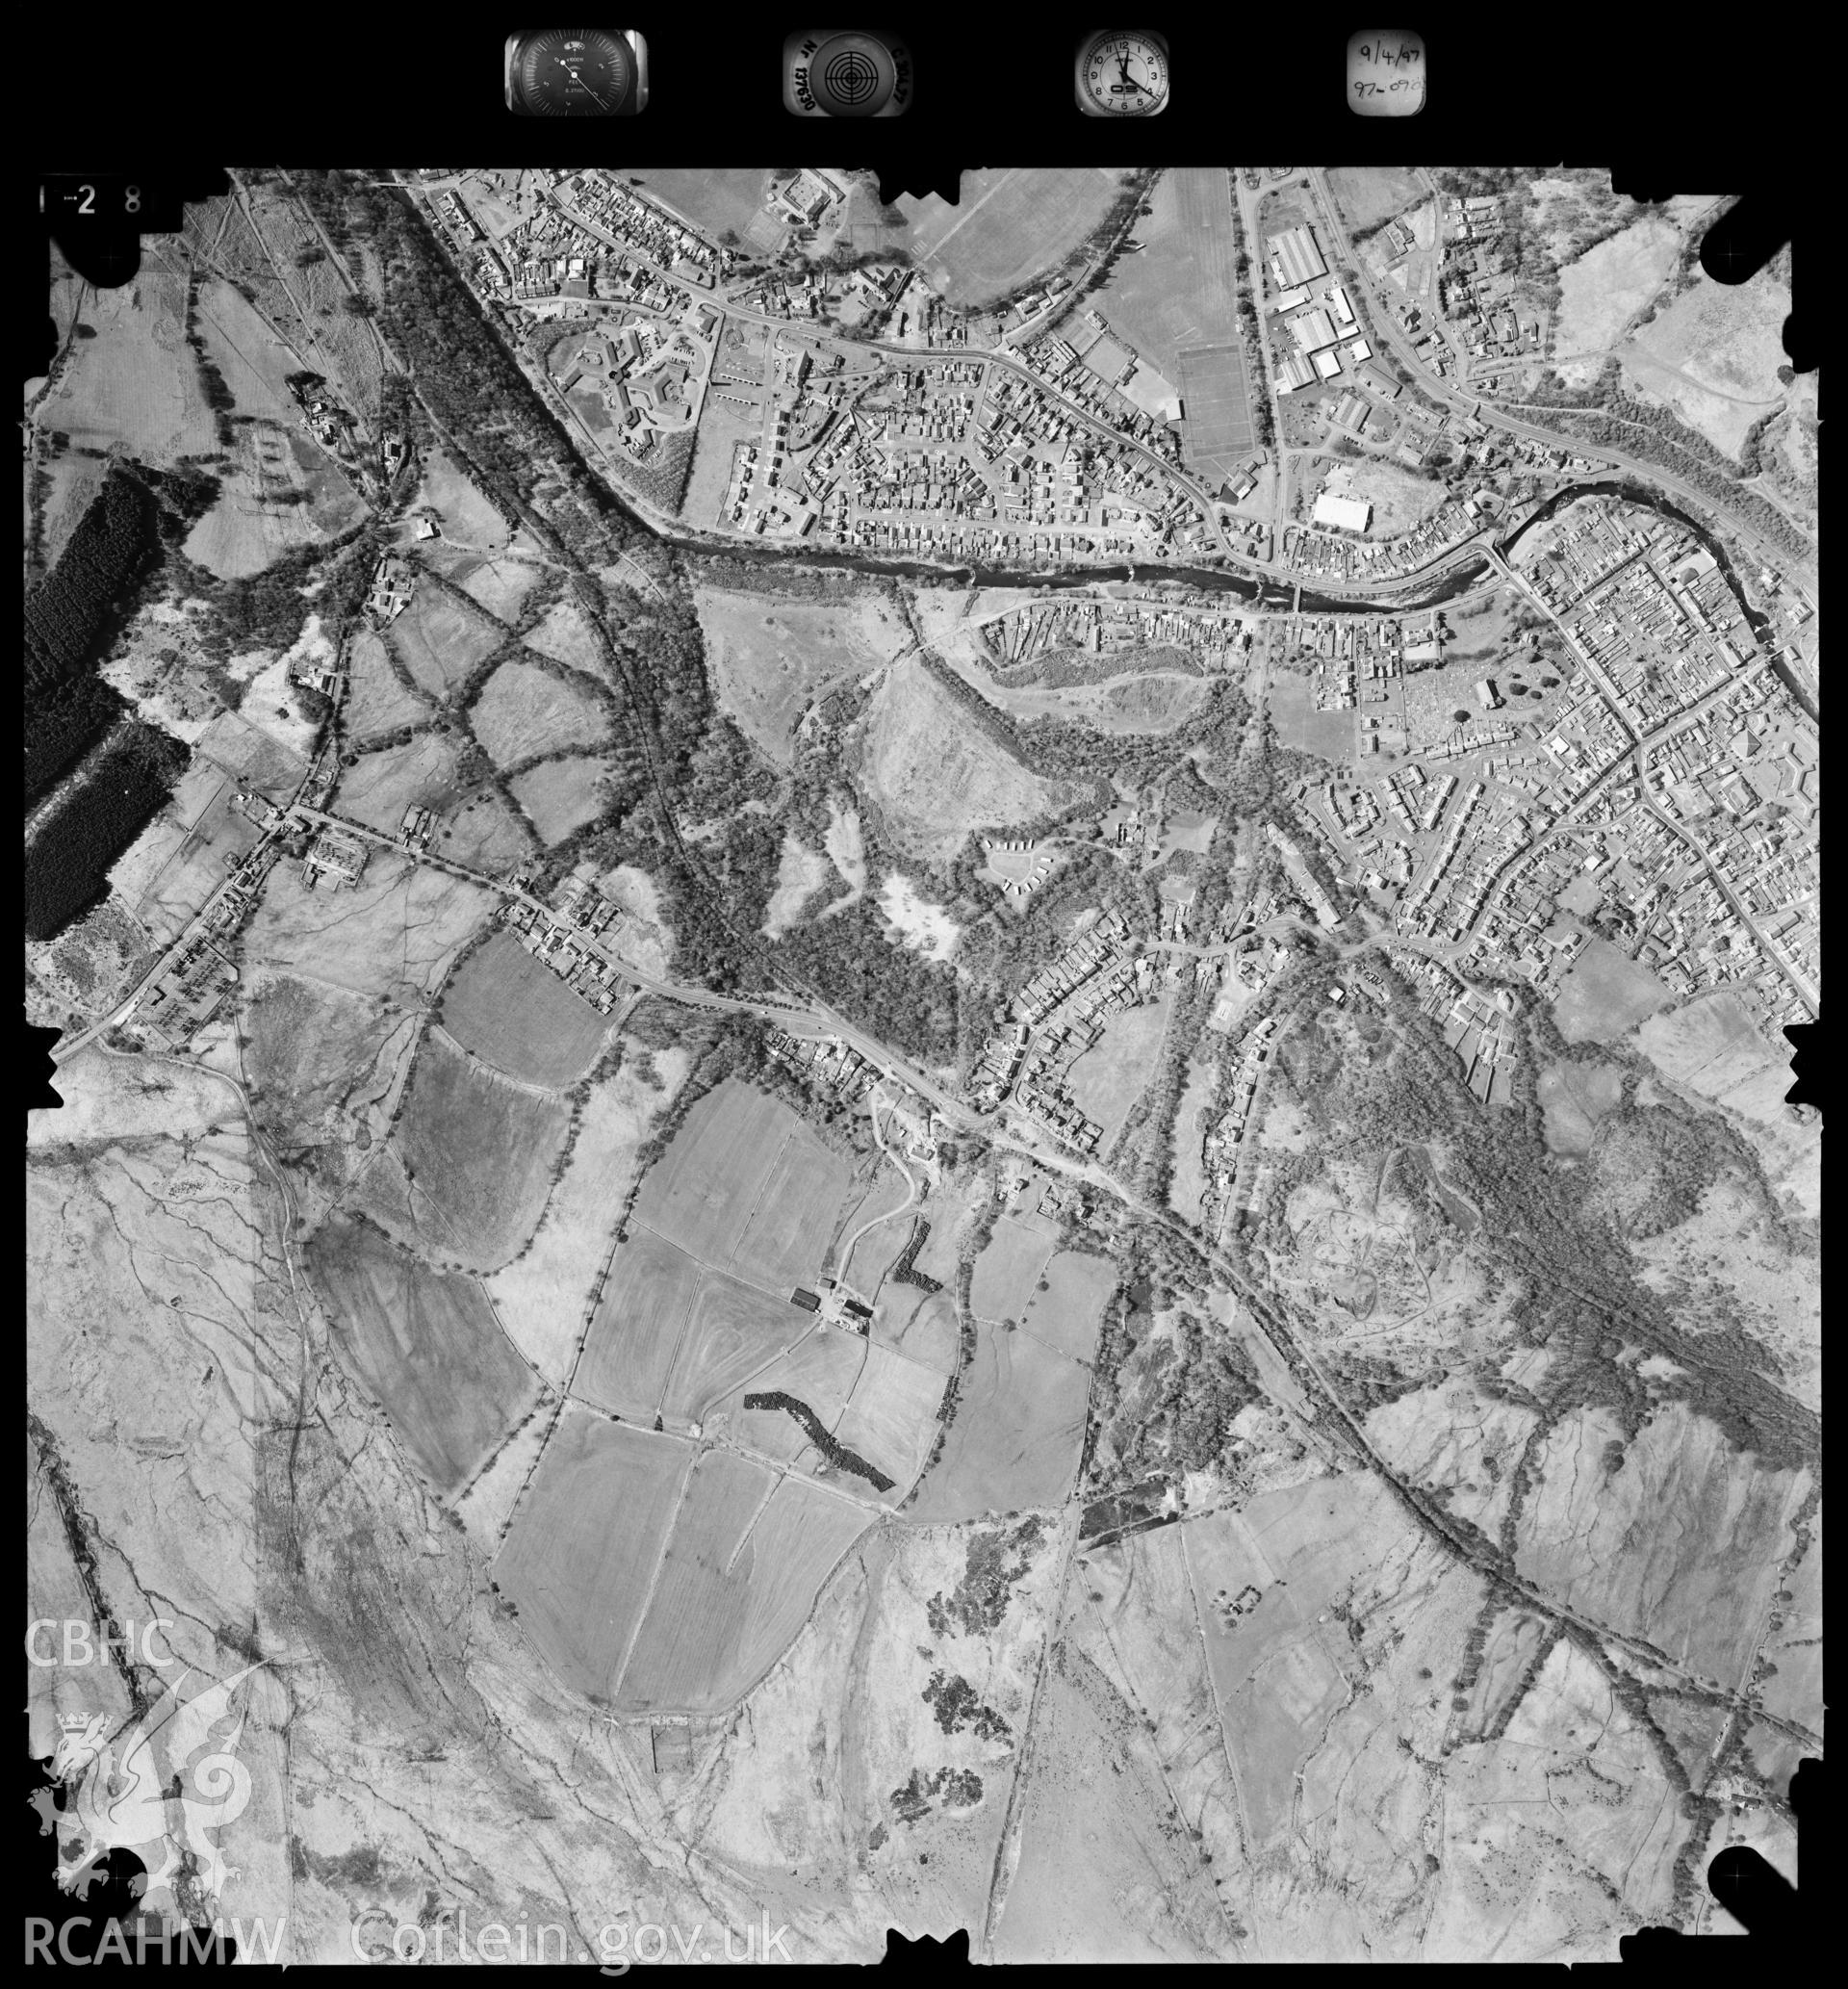 Digitized copy of an aerial photograph showing the Ystradgynlais area, taken by Ordnance Survey, 1997.